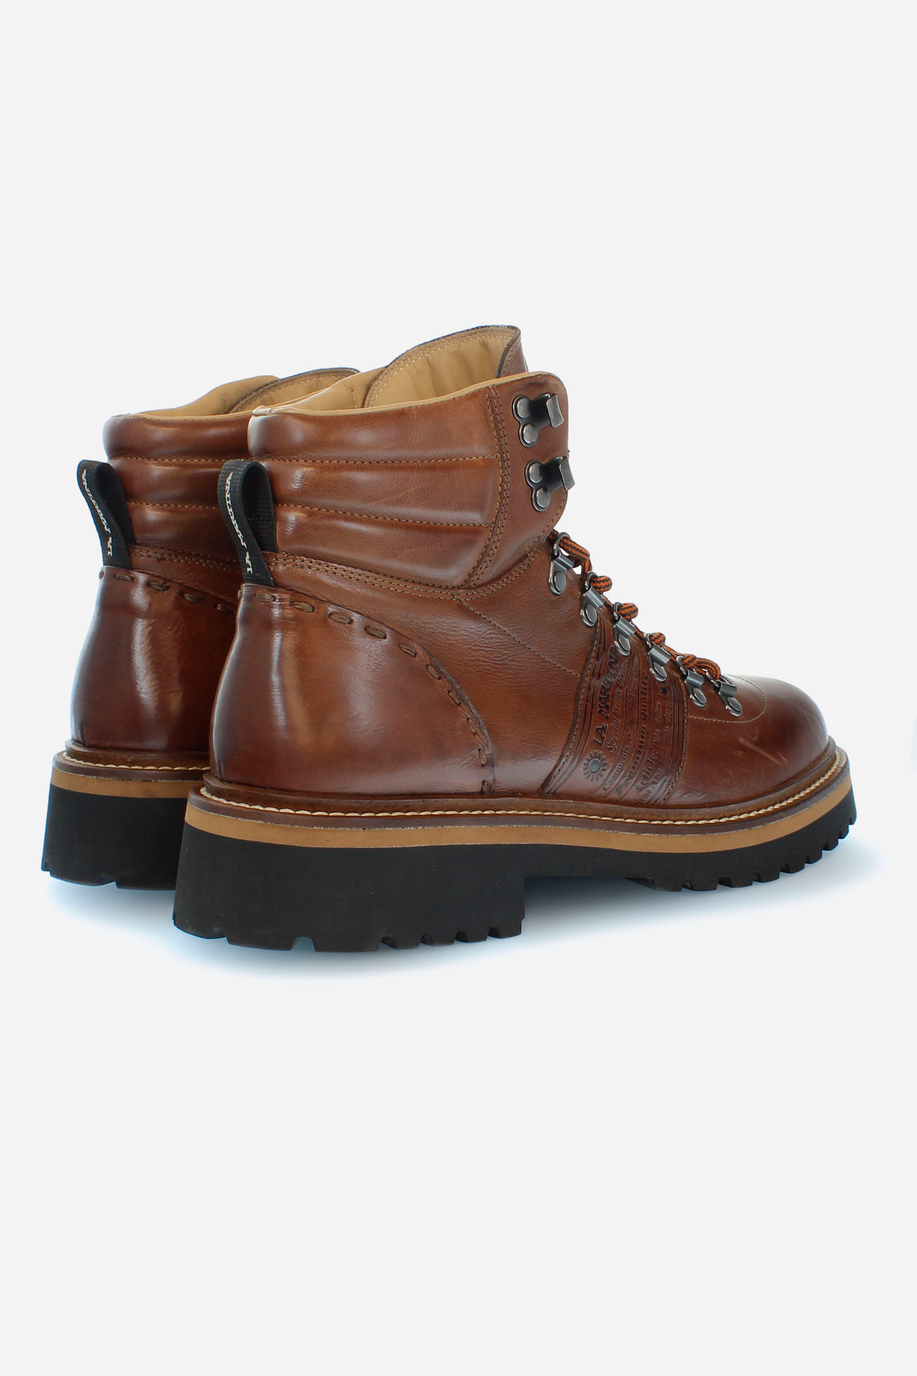 Men's urban style ankle boot in leather - Formal Shoes | La Martina - Official Online Shop